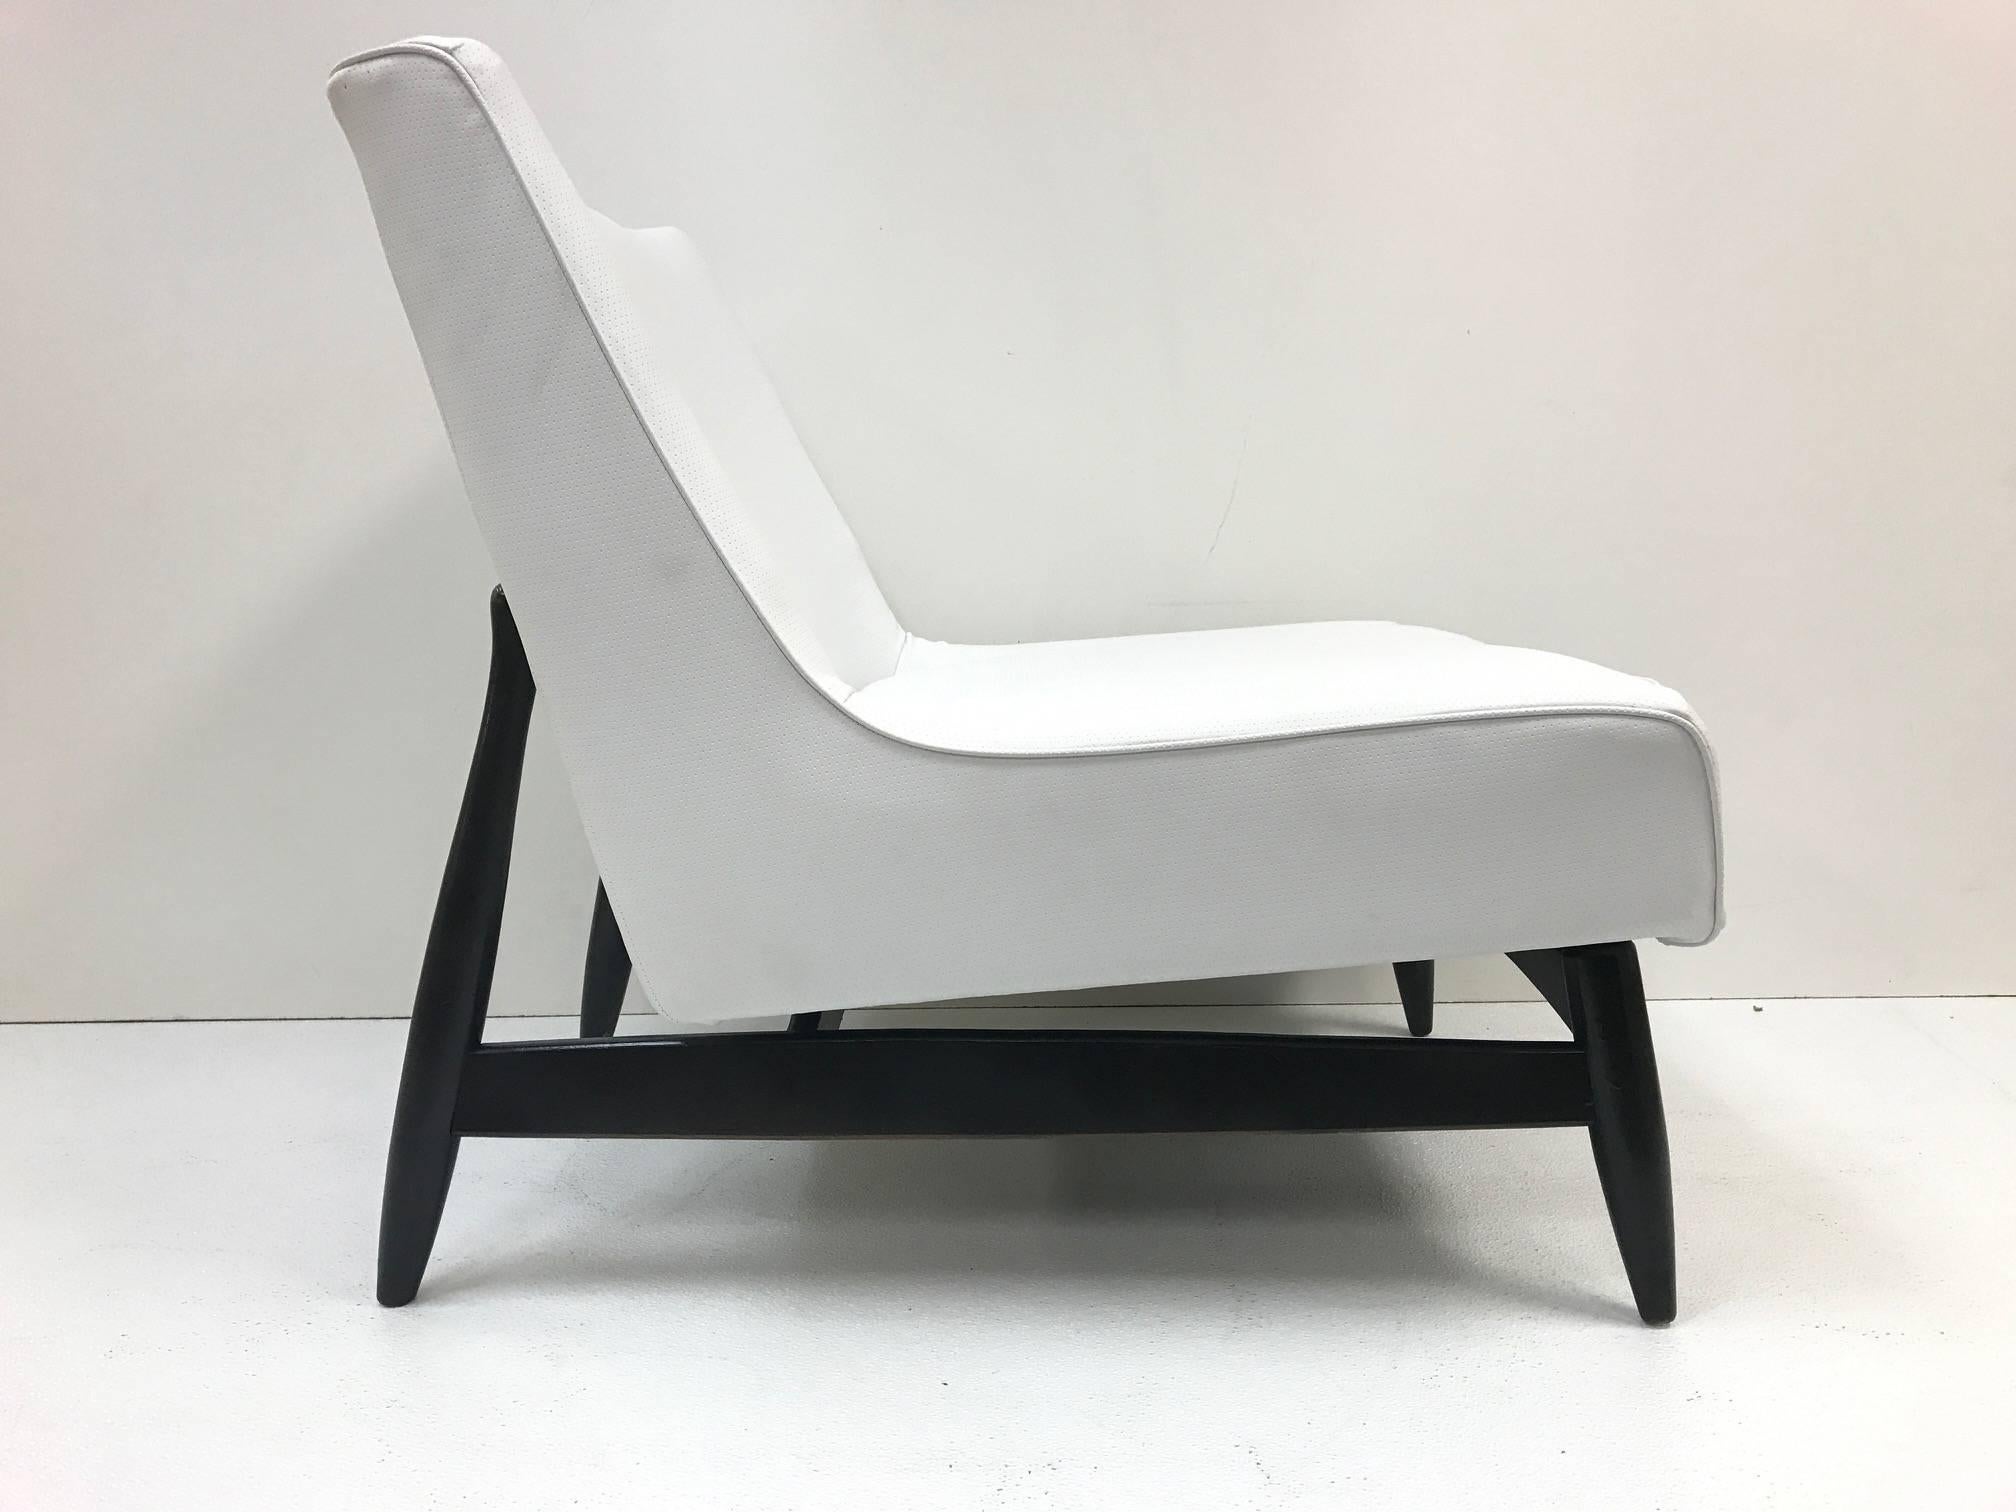 Pair of Paul McCobb style lounge chairs. Chairs have black lacquered frames with white leatherette upholstery.